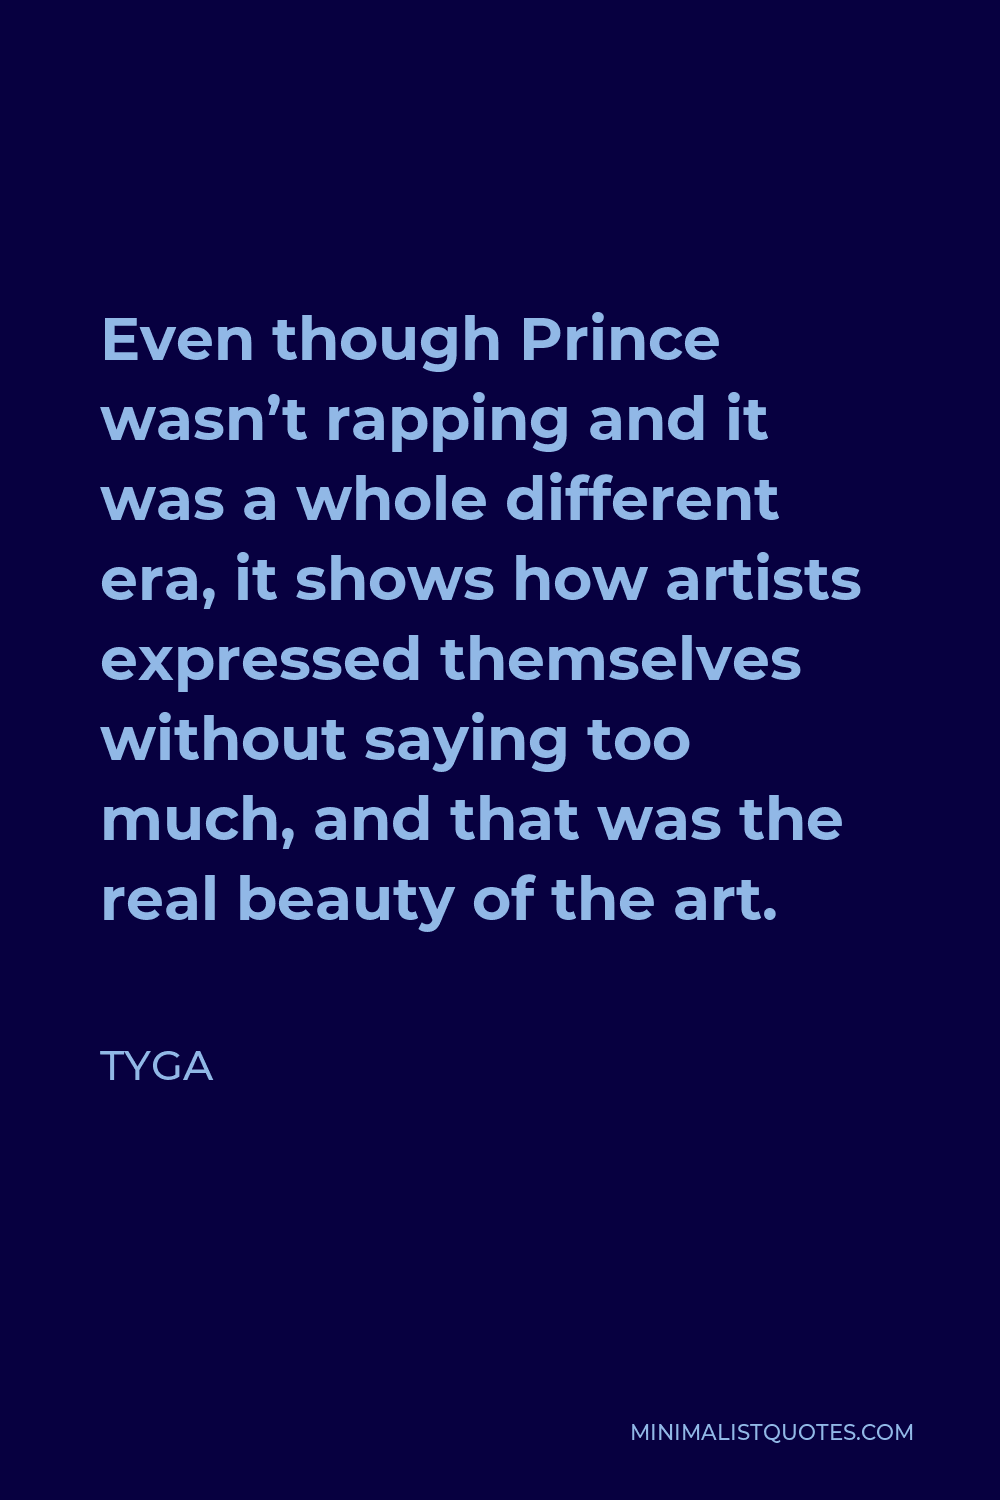 Tyga Quote - Even though Prince wasn’t rapping and it was a whole different era, it shows how artists expressed themselves without saying too much, and that was the real beauty of the art.